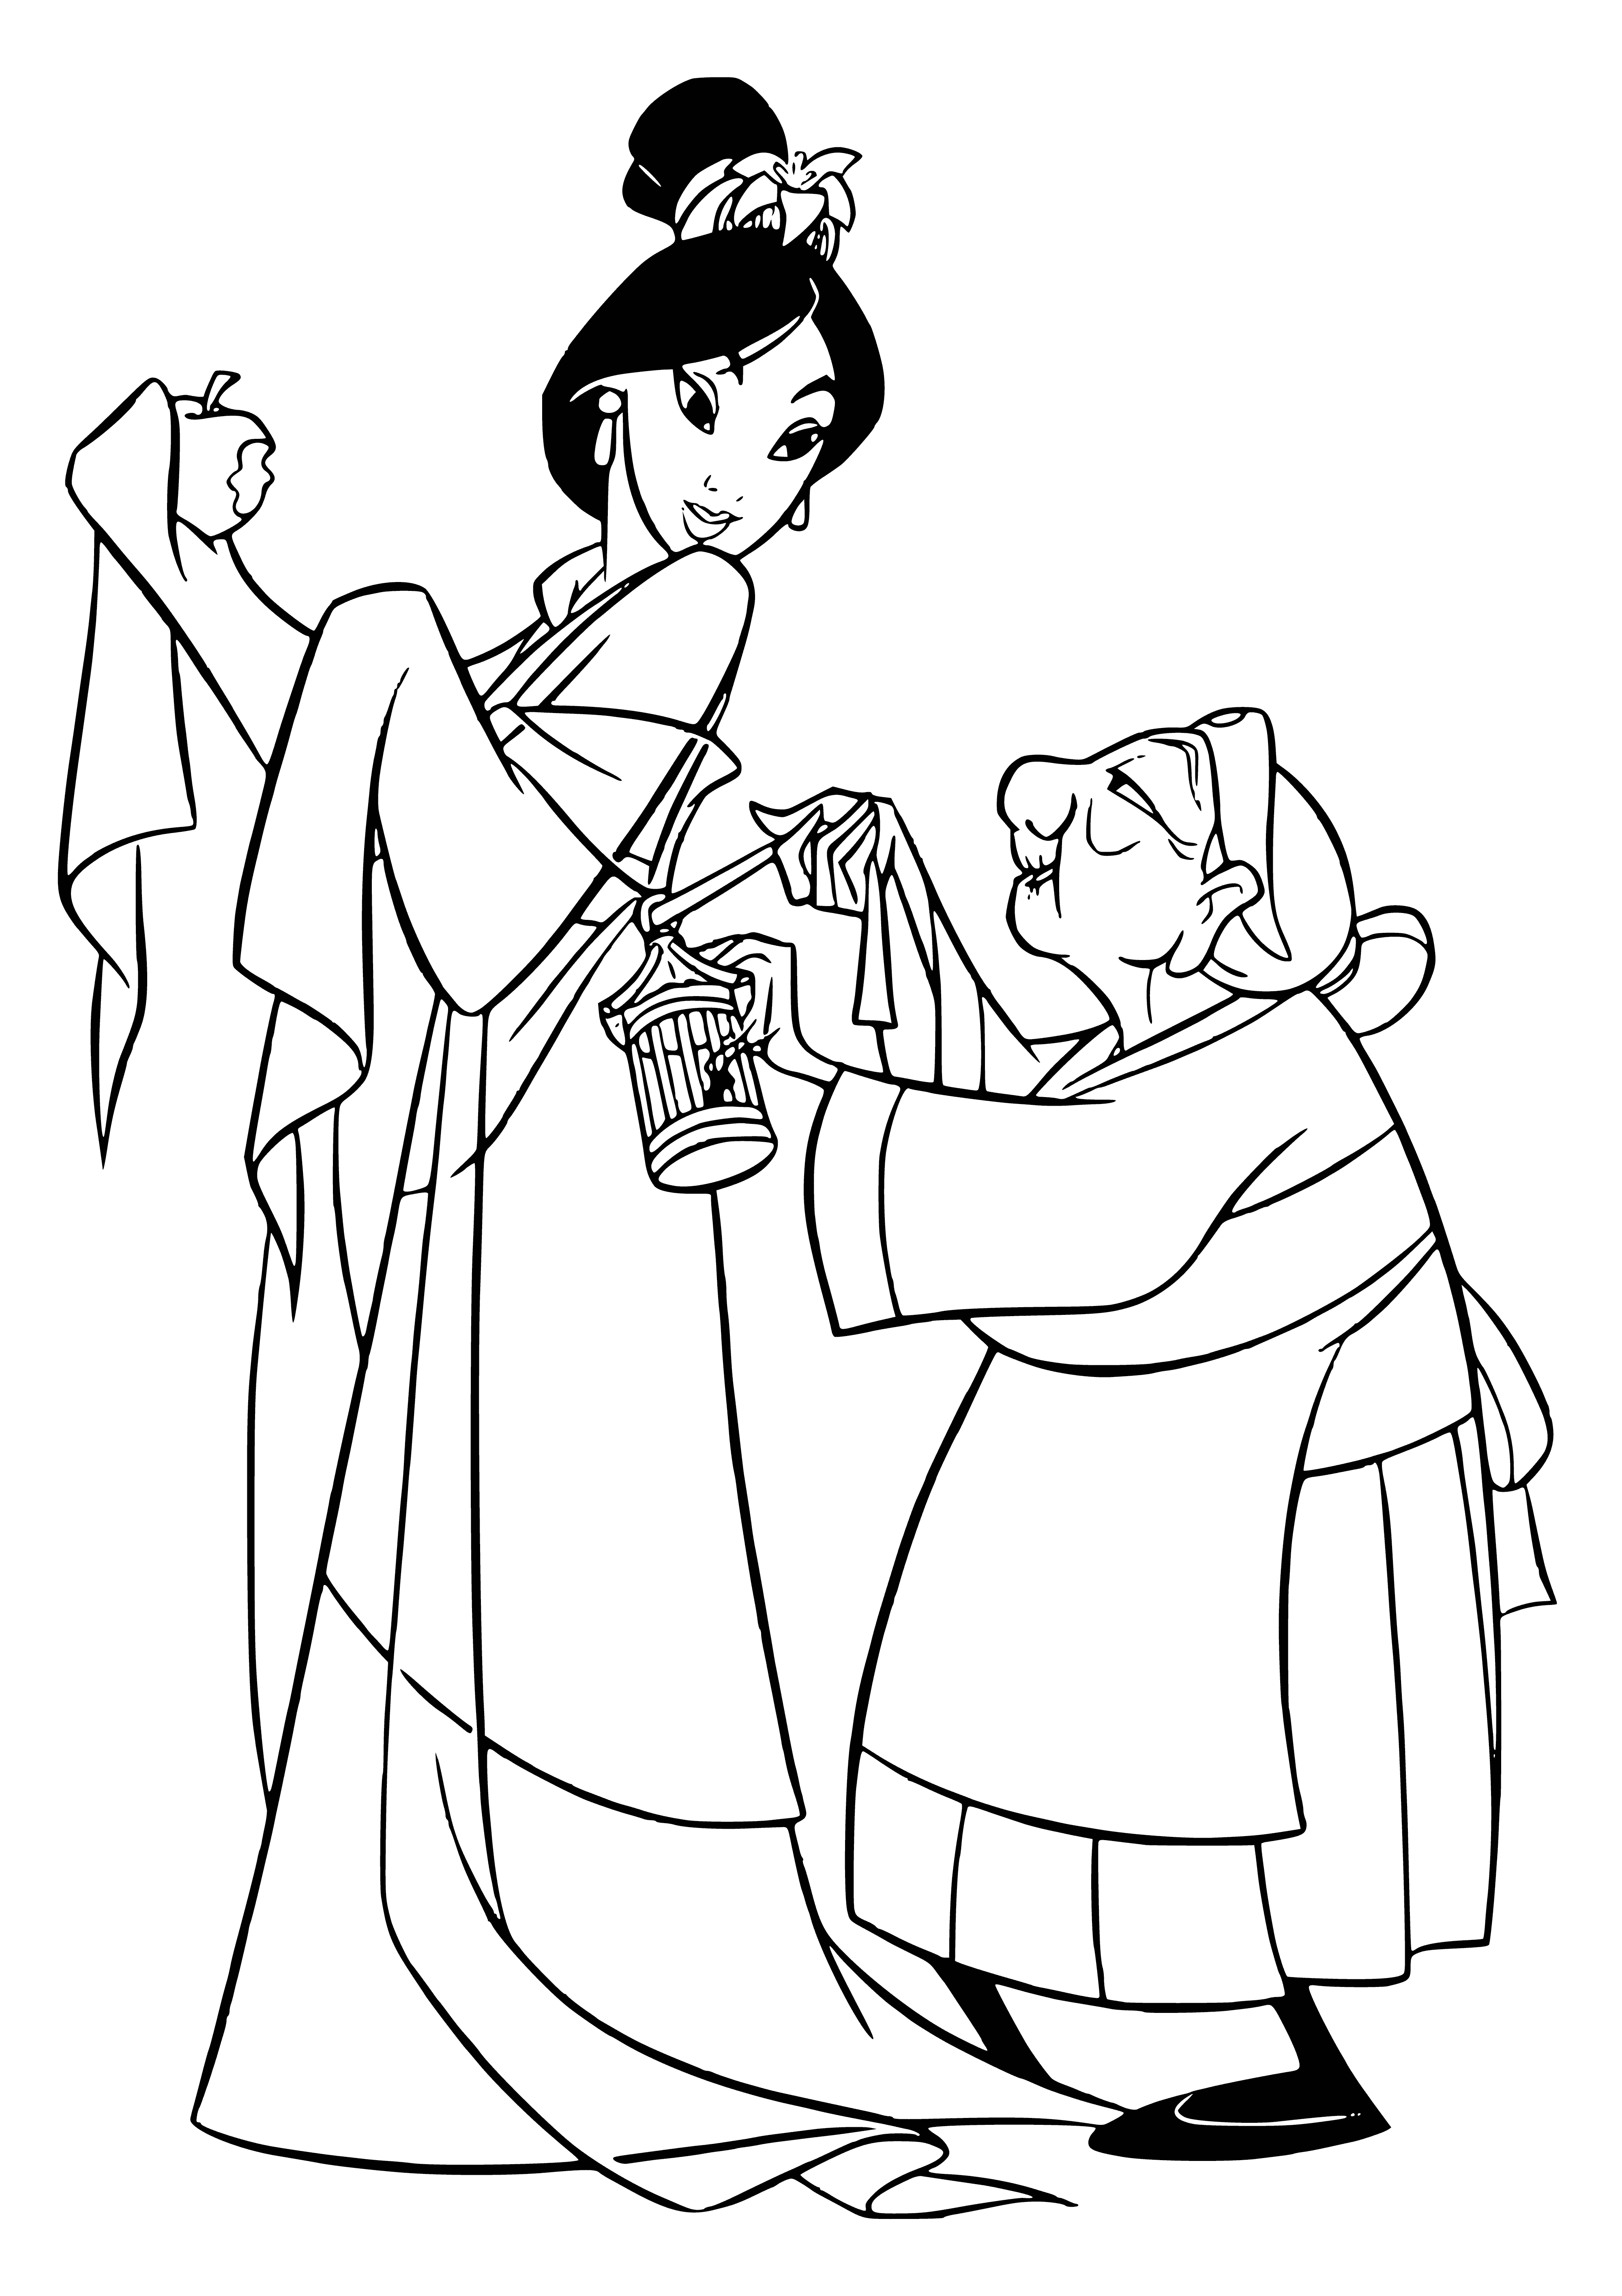 coloring page: Mulan sits nervously in front of a matchmaker, wearing a red dress & her hair in a bun, as the matchmaker reads from a book. #ChineseLegend